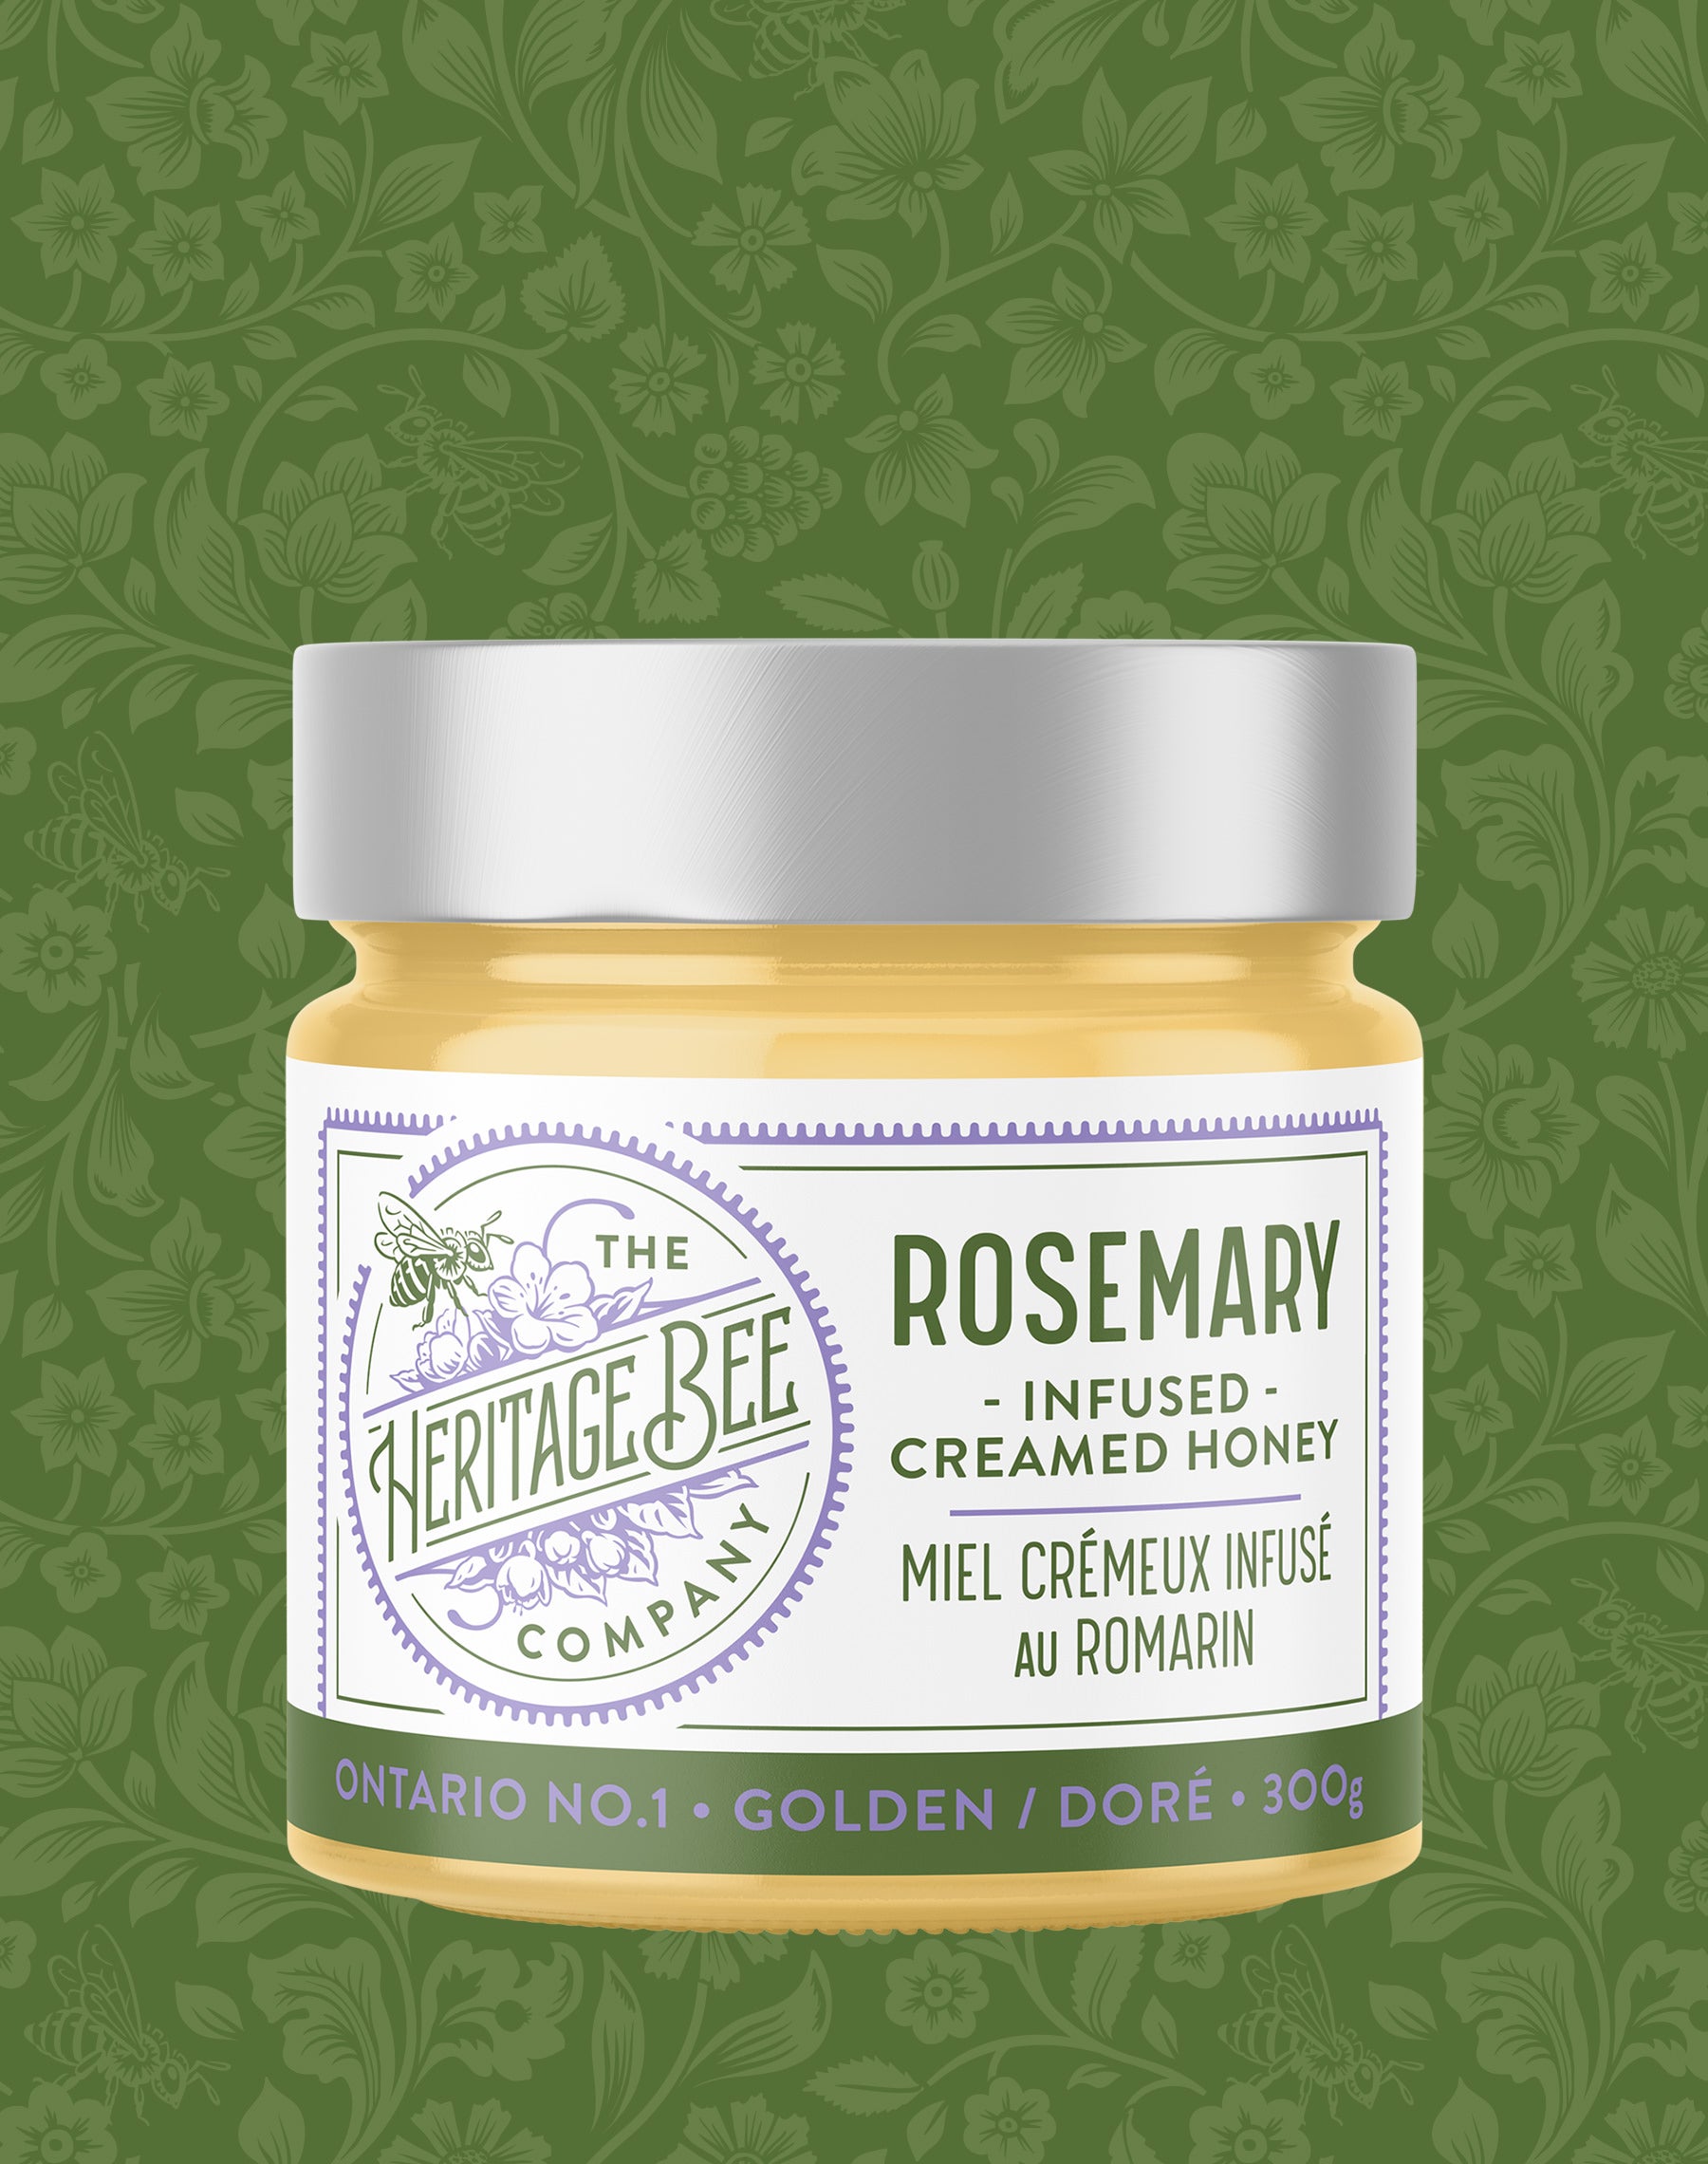 Premium Ontario wildflower creamed honey infused with hand-ground organic rosemary. Handcrafted locally by Heritage Bee Co. Perfect for charcuterie or to glaze chicken, lamb, pork, turkey and roasted vegetables. 